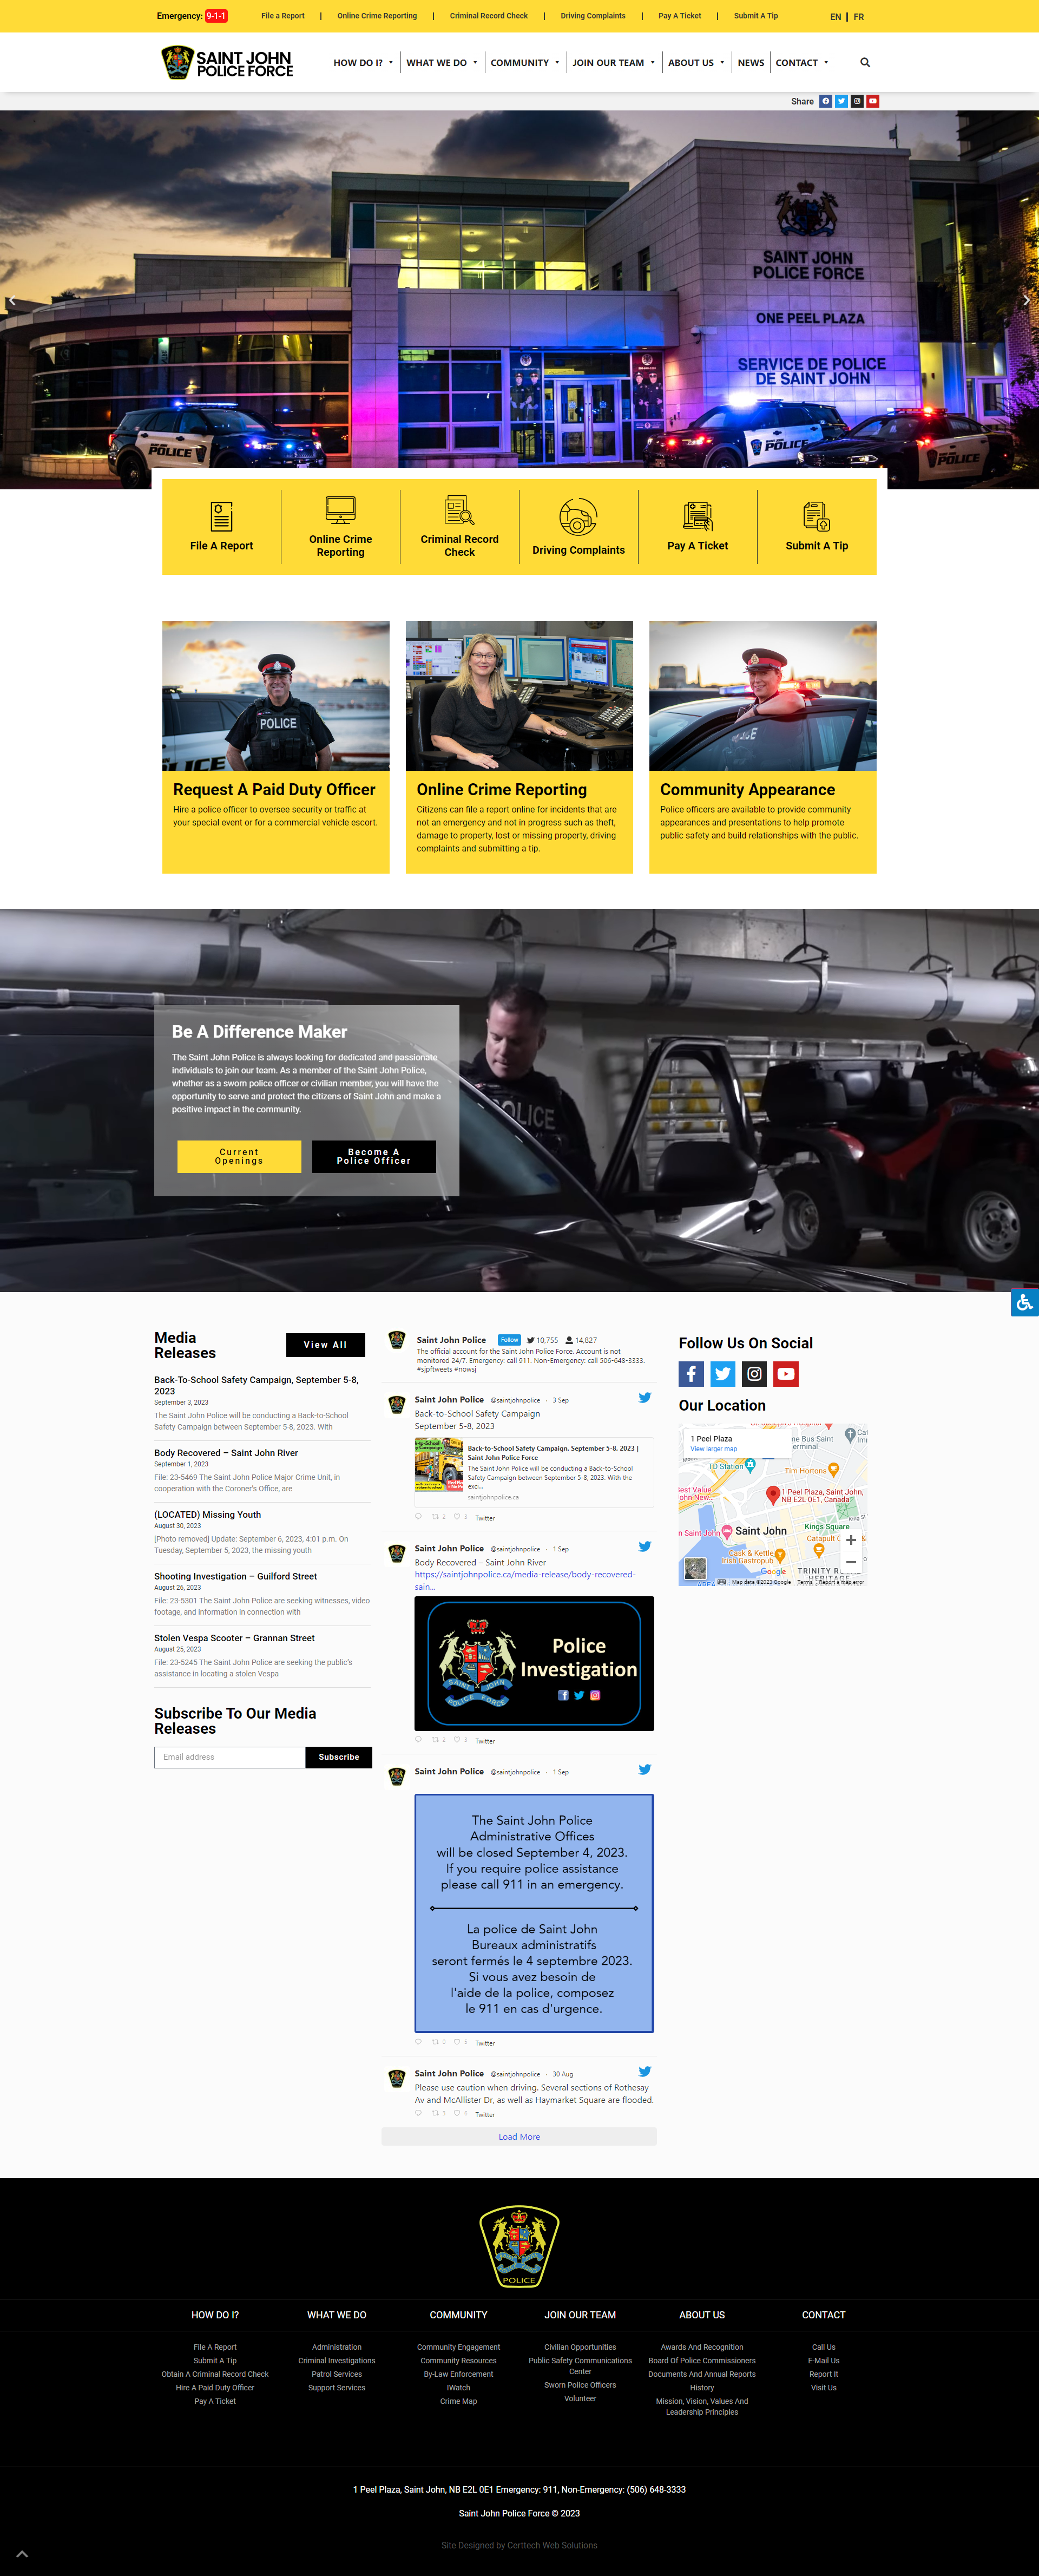 A website with a yellow and black background.